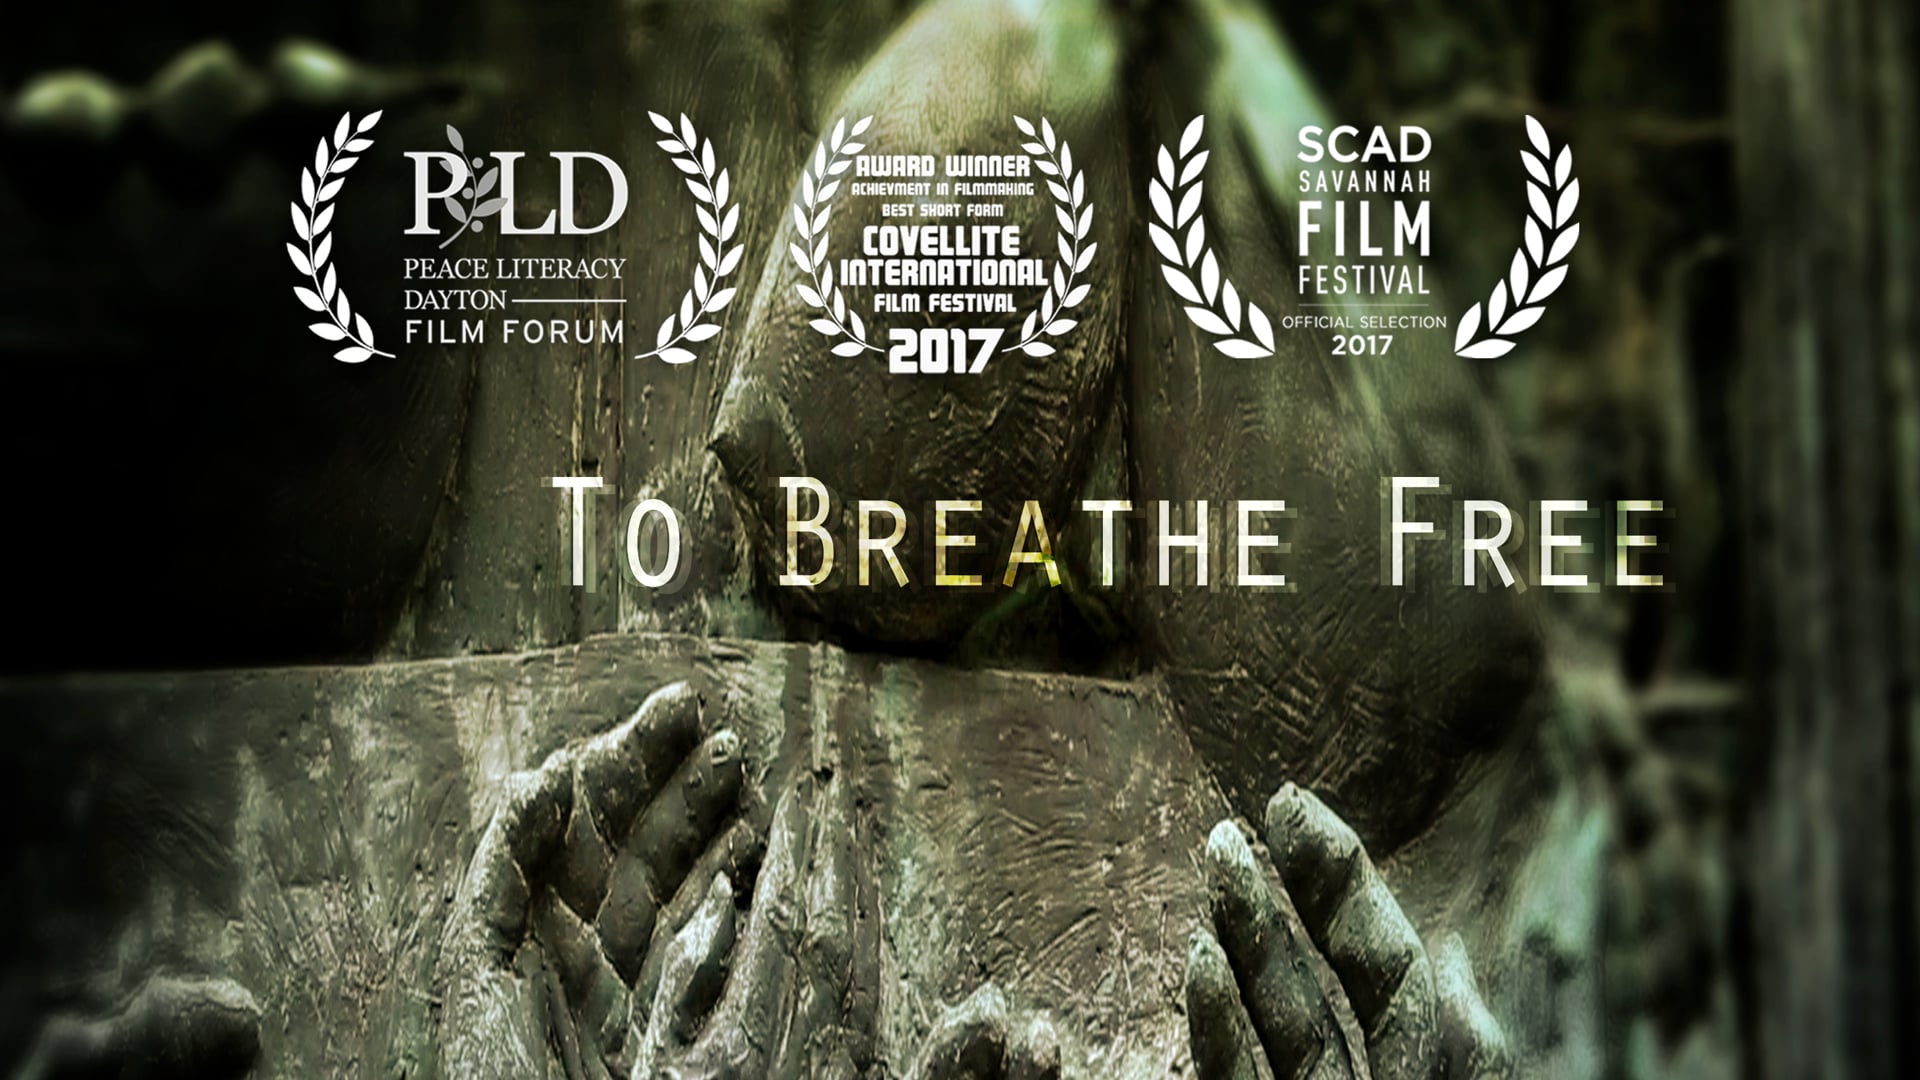 Trailer for "To Breathe Free"